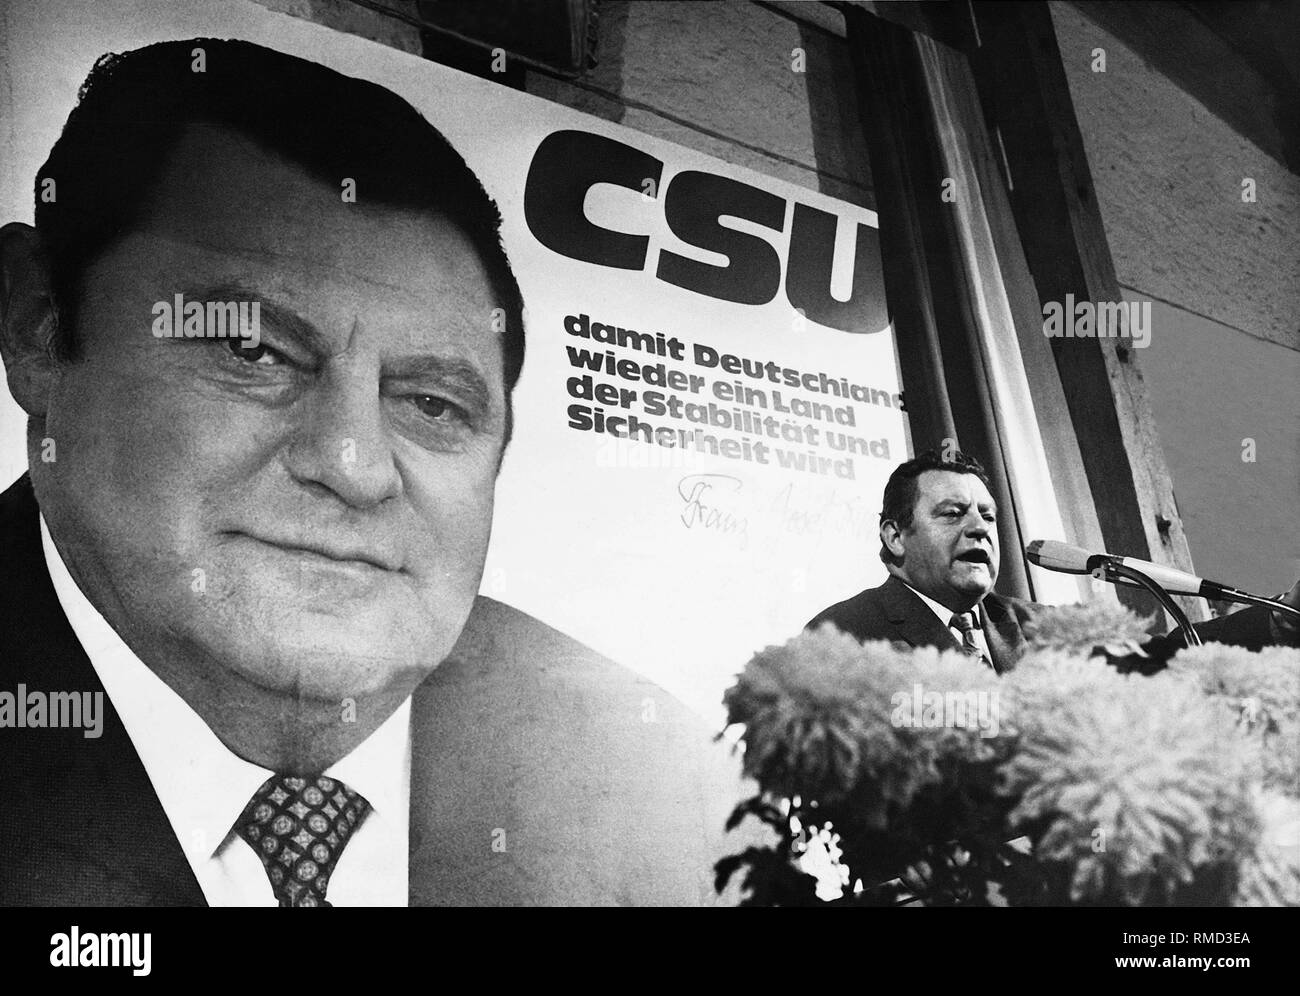 Franz Josef Strauss in a speech during the election campaign for the Bavarian state election of November 22, 1970. In the background the election poster of the CSU with the slogan: "CSU - so that Germany again becomes a land of stability and security" and a portrait of Strauss. Stock Photo